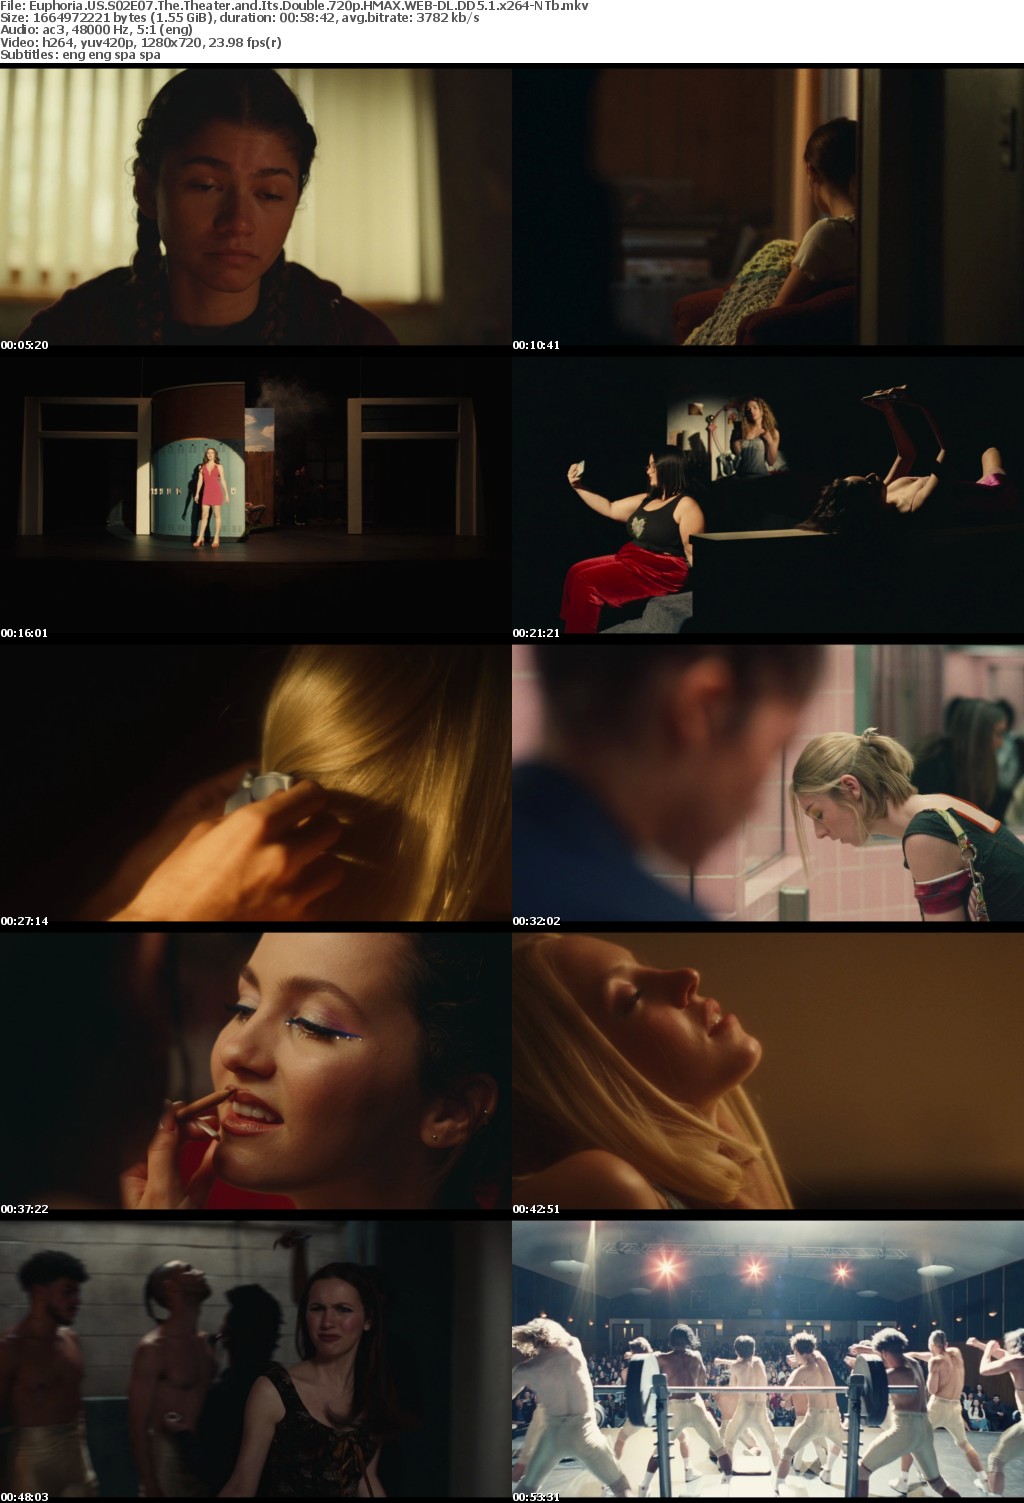 Euphoria US S02E07 The Theater and Its Double 720p HMAX WEBRip DD5 1 x264-NTb